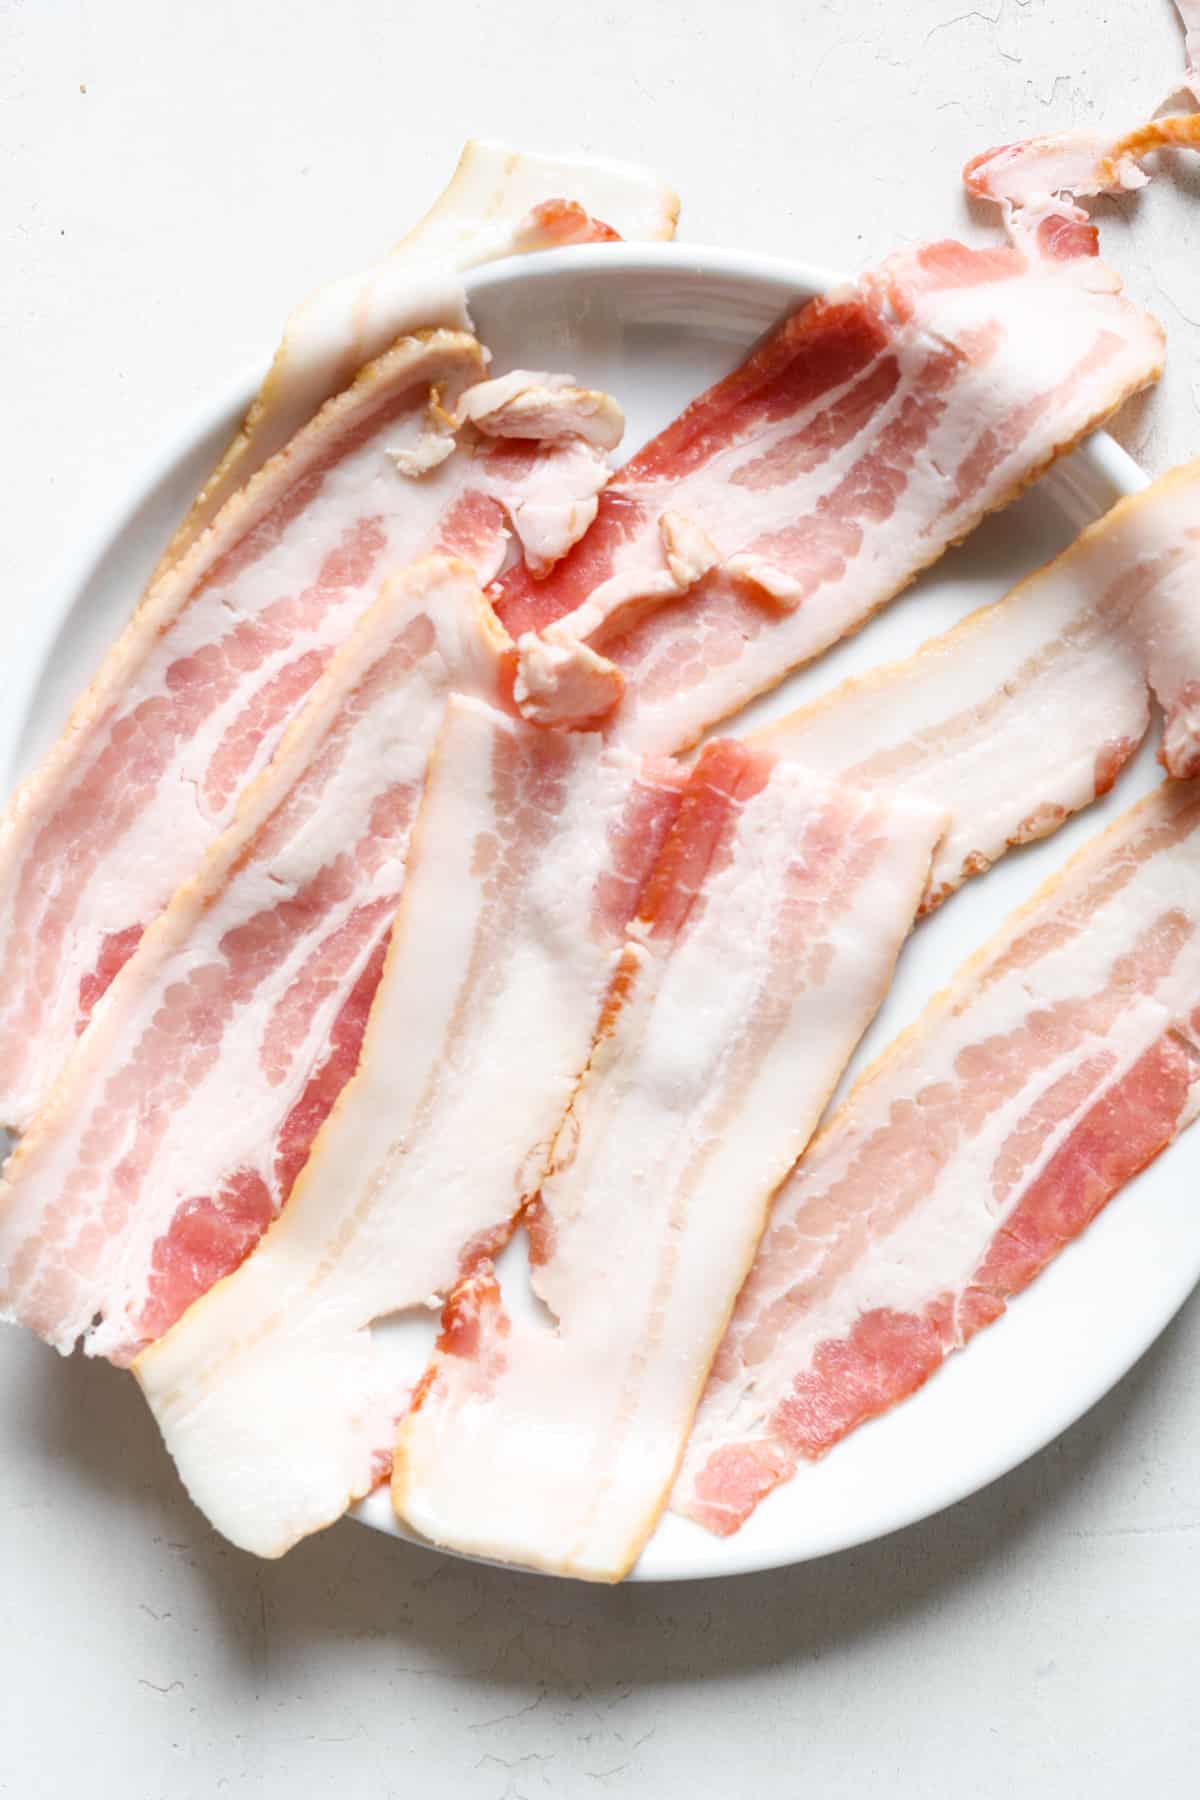 Sliced bacon on plate